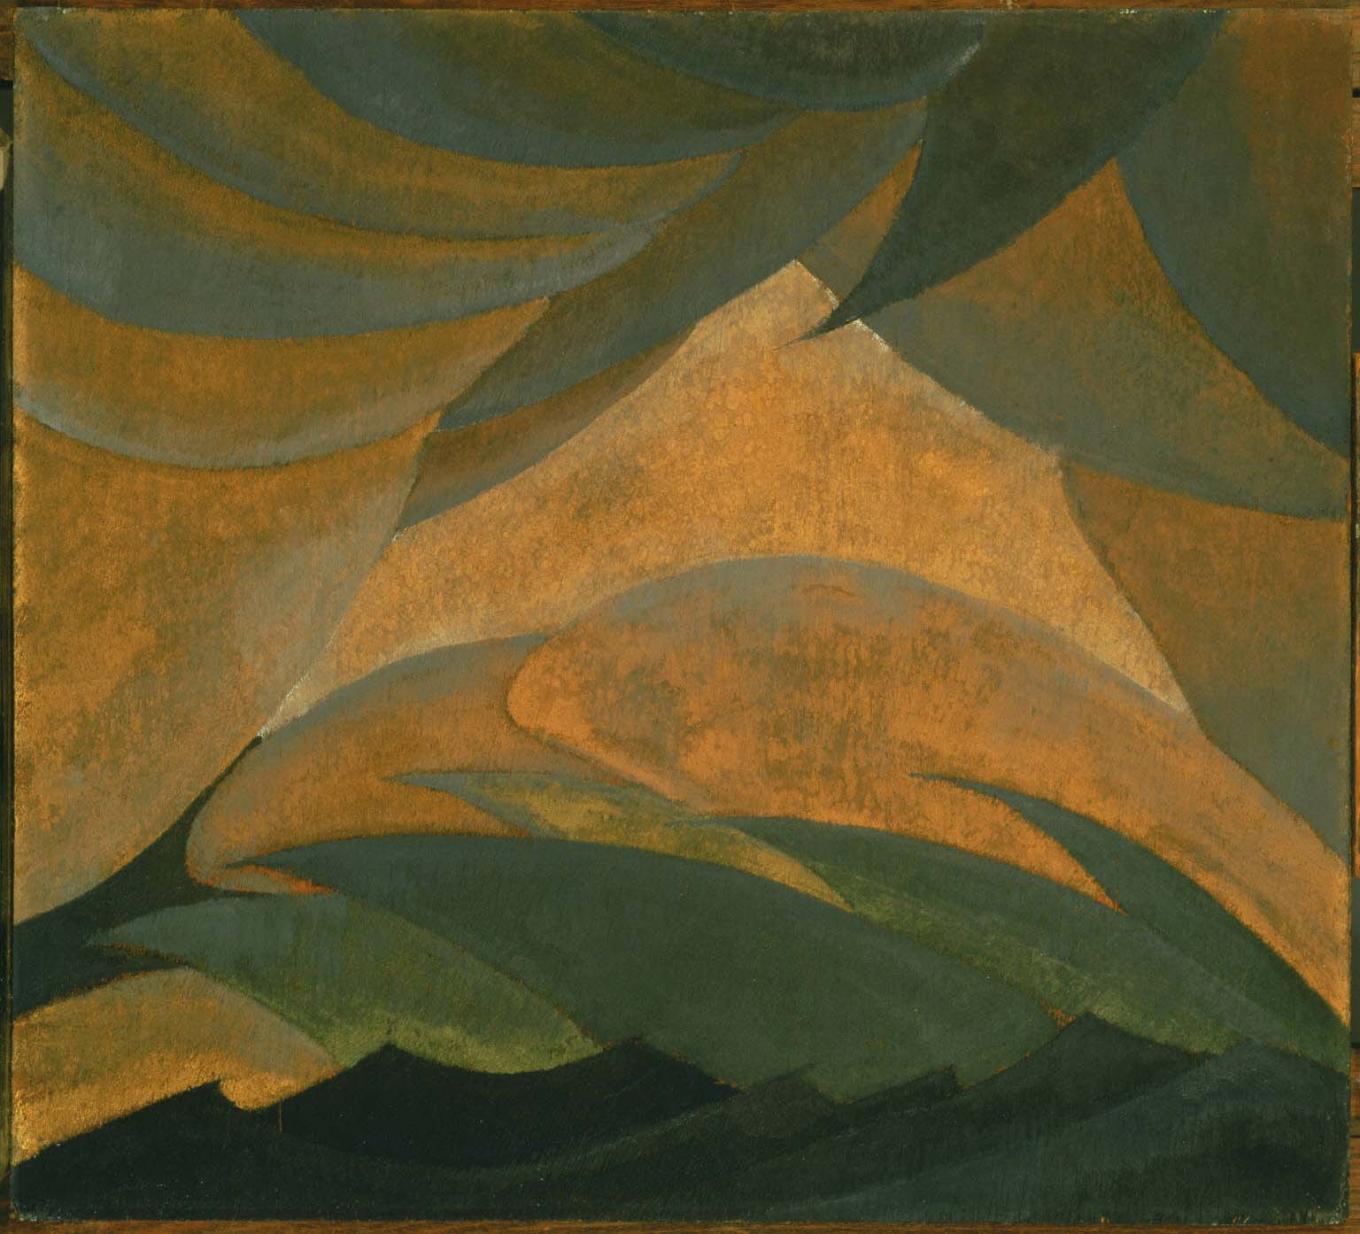 Dove, Arthur G., Golden Storm, 1925, Oil and metallic paint on plywood panel 18 9/16 x 20 1/2 in., The Phillips Collection, Acquired 1926